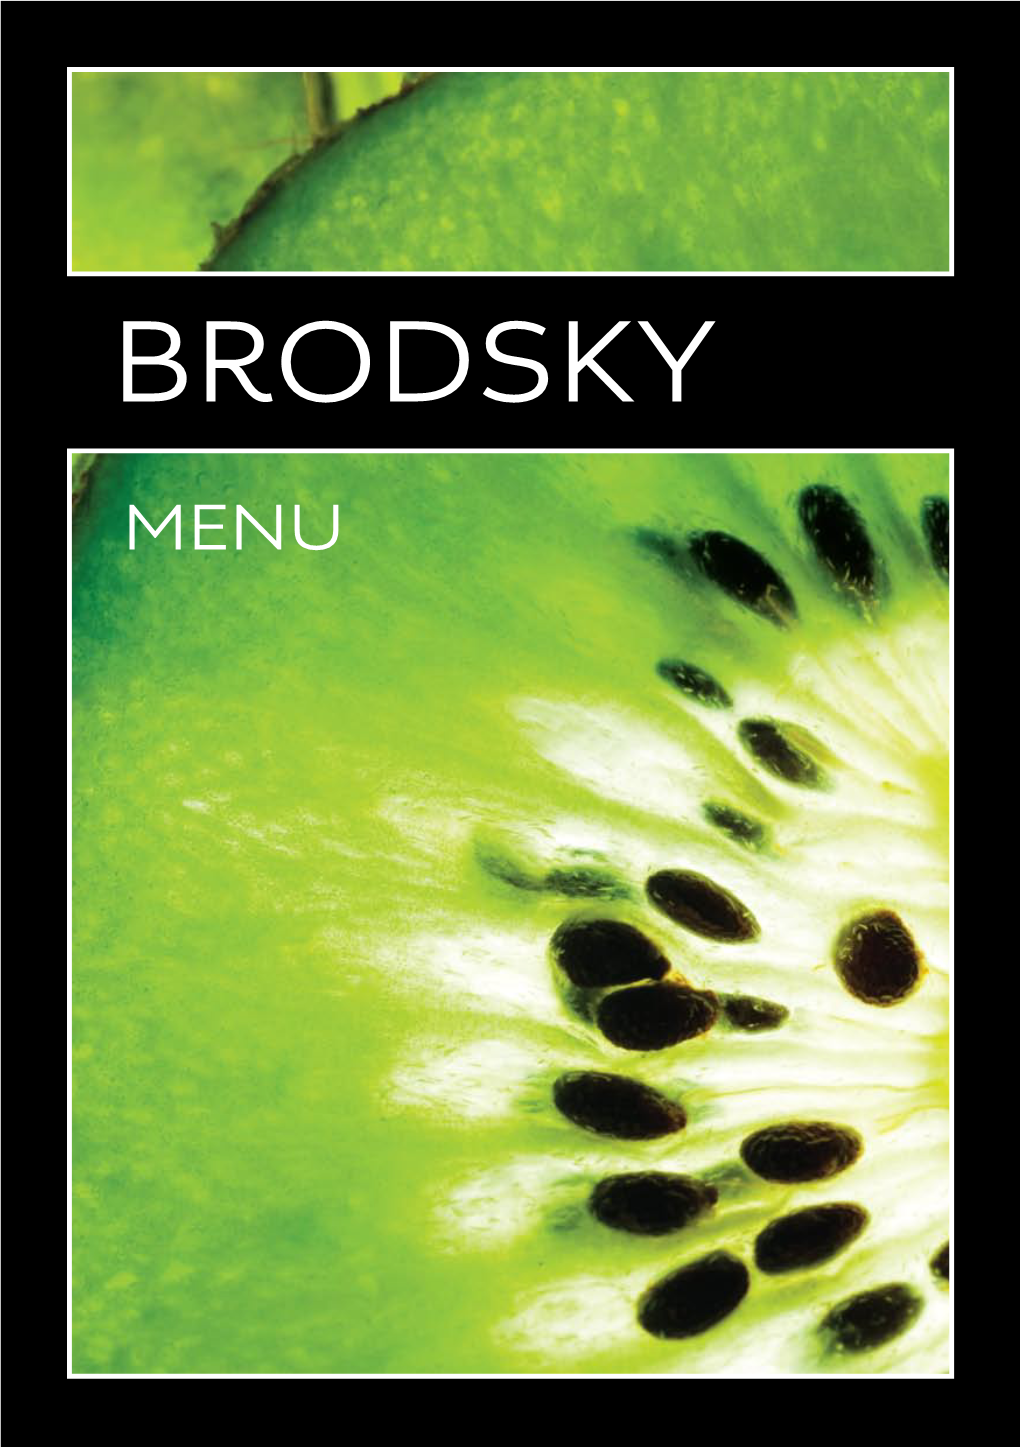 BRODSKY Menu Opening Times: Monday – Saturday 11Am – 11Pm Food Available 12 Noon – 8.30Pm